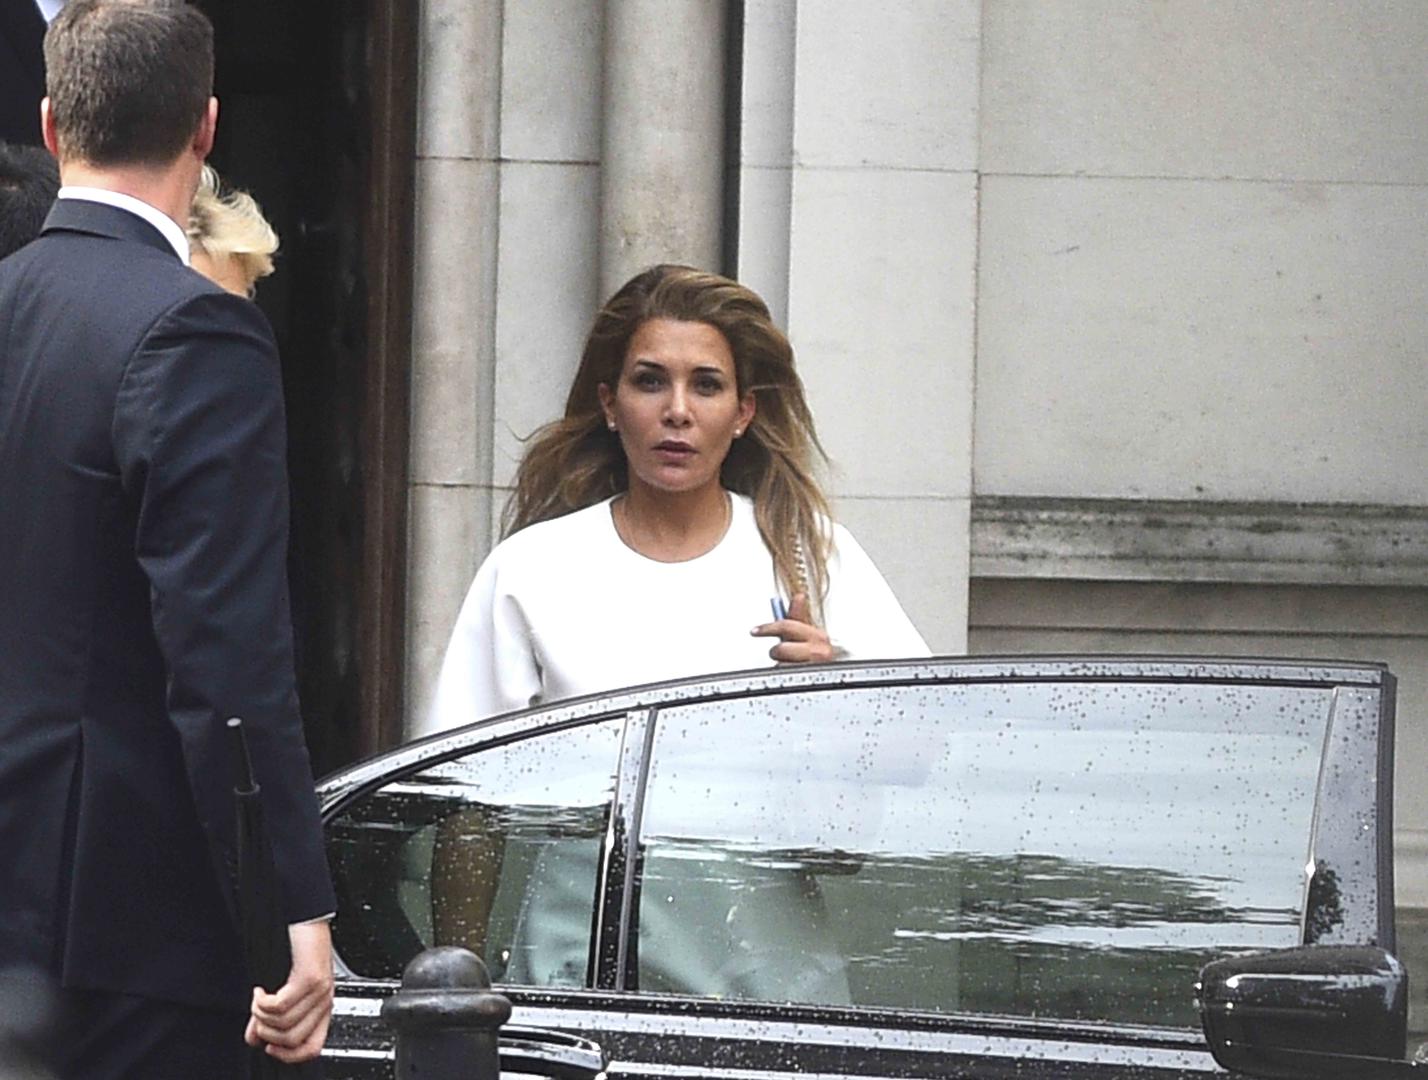 Princess Haya Bint Al Hussein leaving the Royal Courts of Justice in London after the latest hearing in the High Court battle between the ruler of Dubai and his estranged wife over their children.